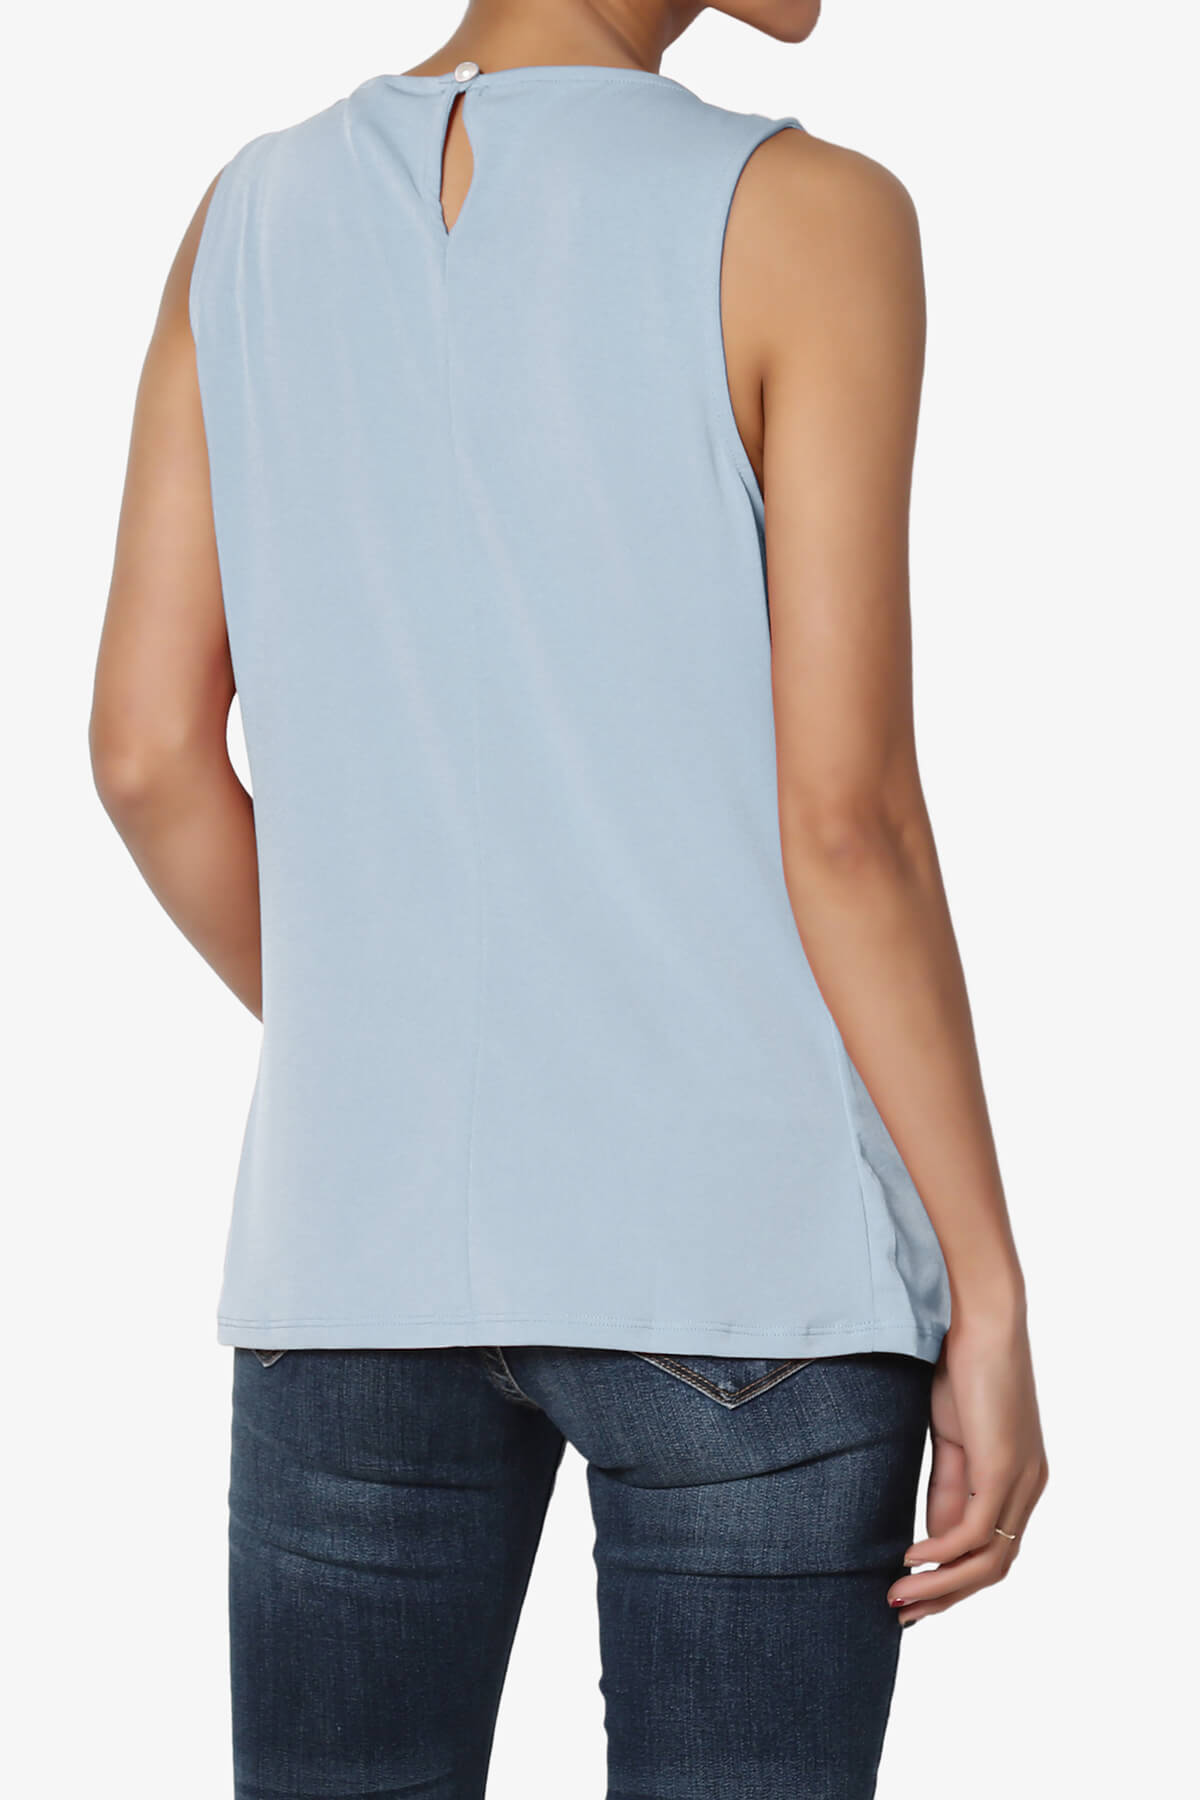 Load image into Gallery viewer, Chaffee Pleat Neck Tank Top ASH BLUE_2
